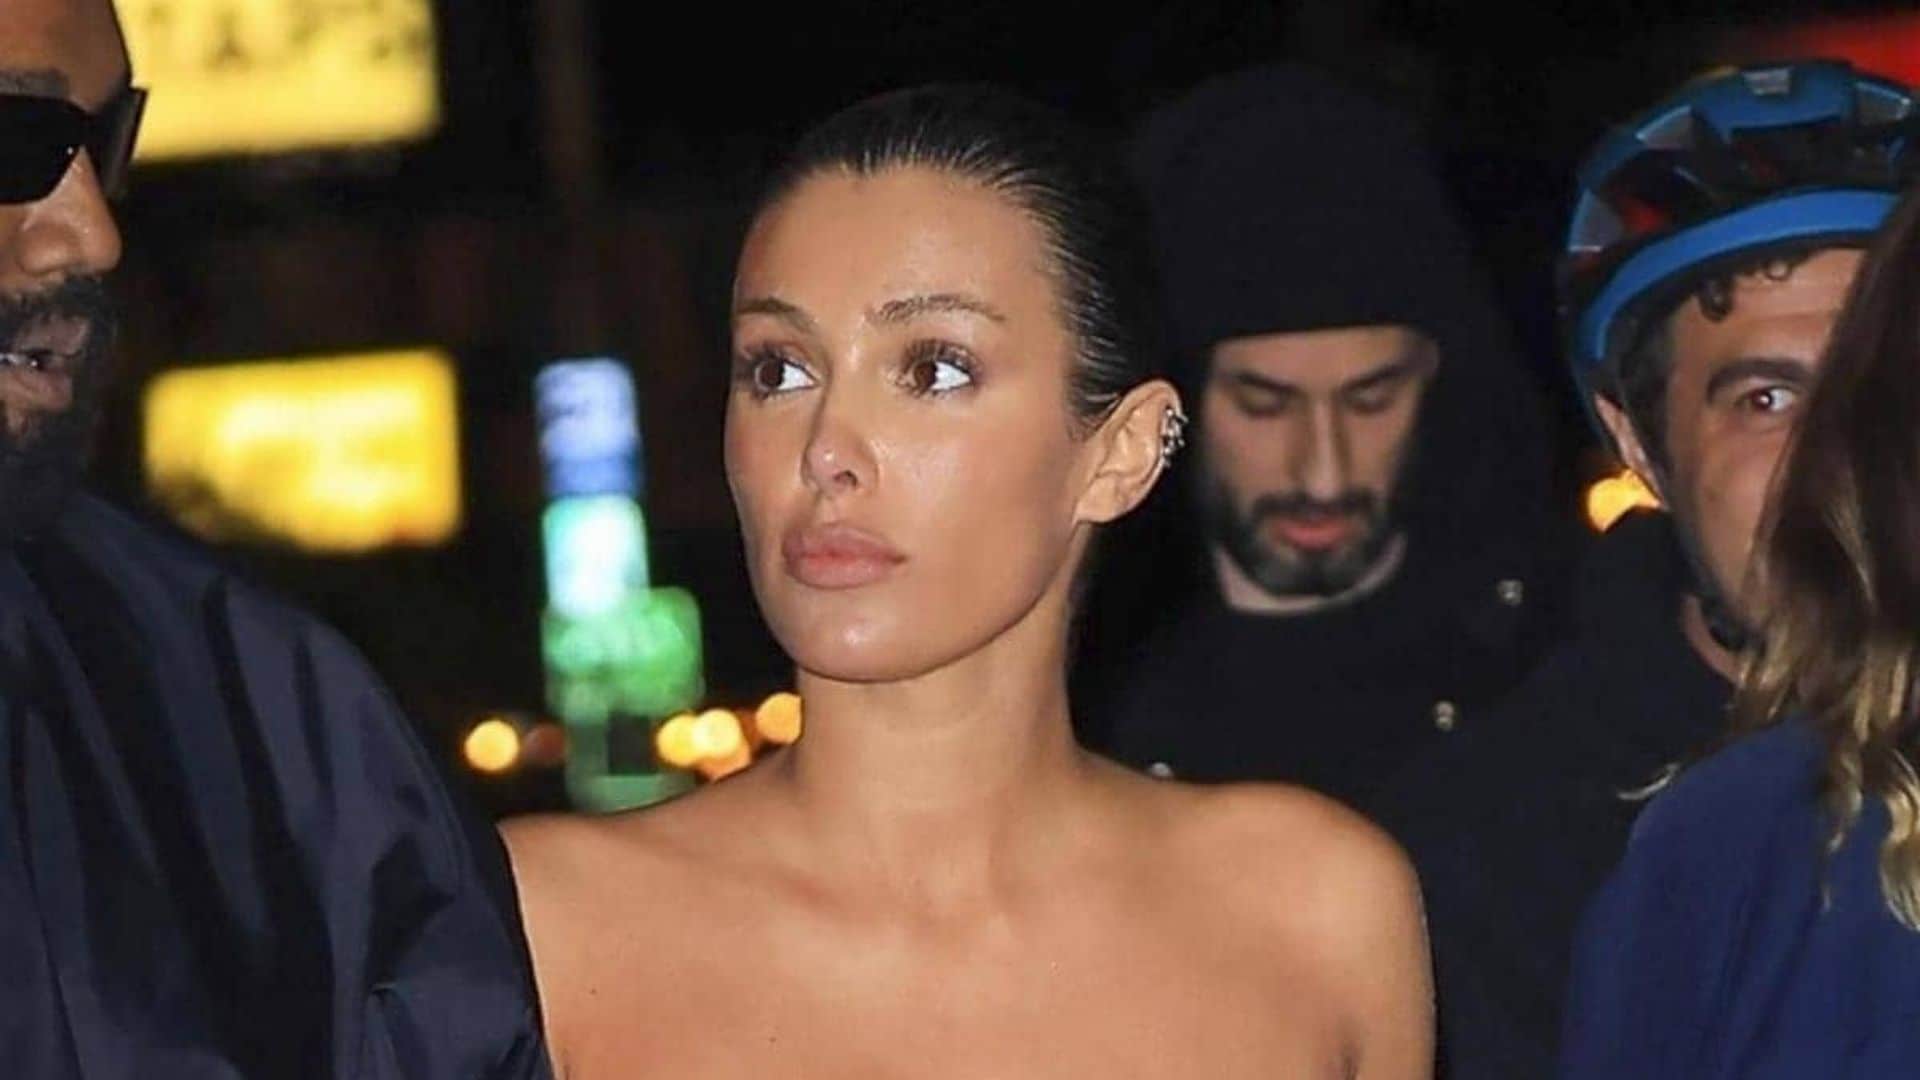 Bianca Censori meets Kanye West in Florence after her Australian getaway without him